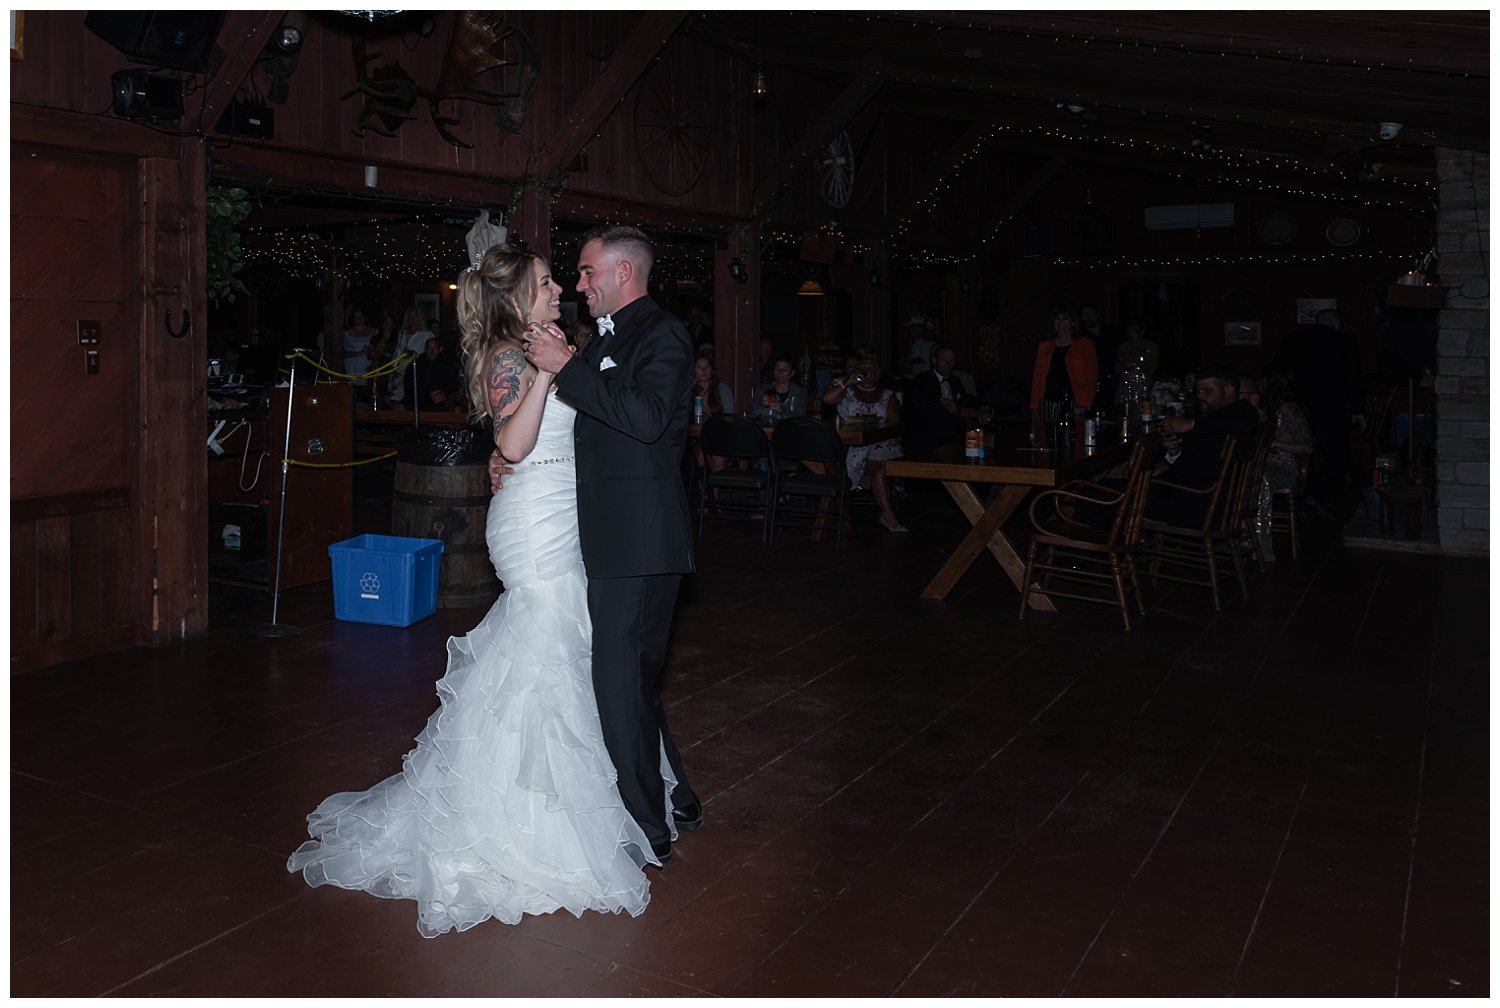 The first dance takes place for the bride and groom during their wedding reception at Hatfield Farm in Halifax.